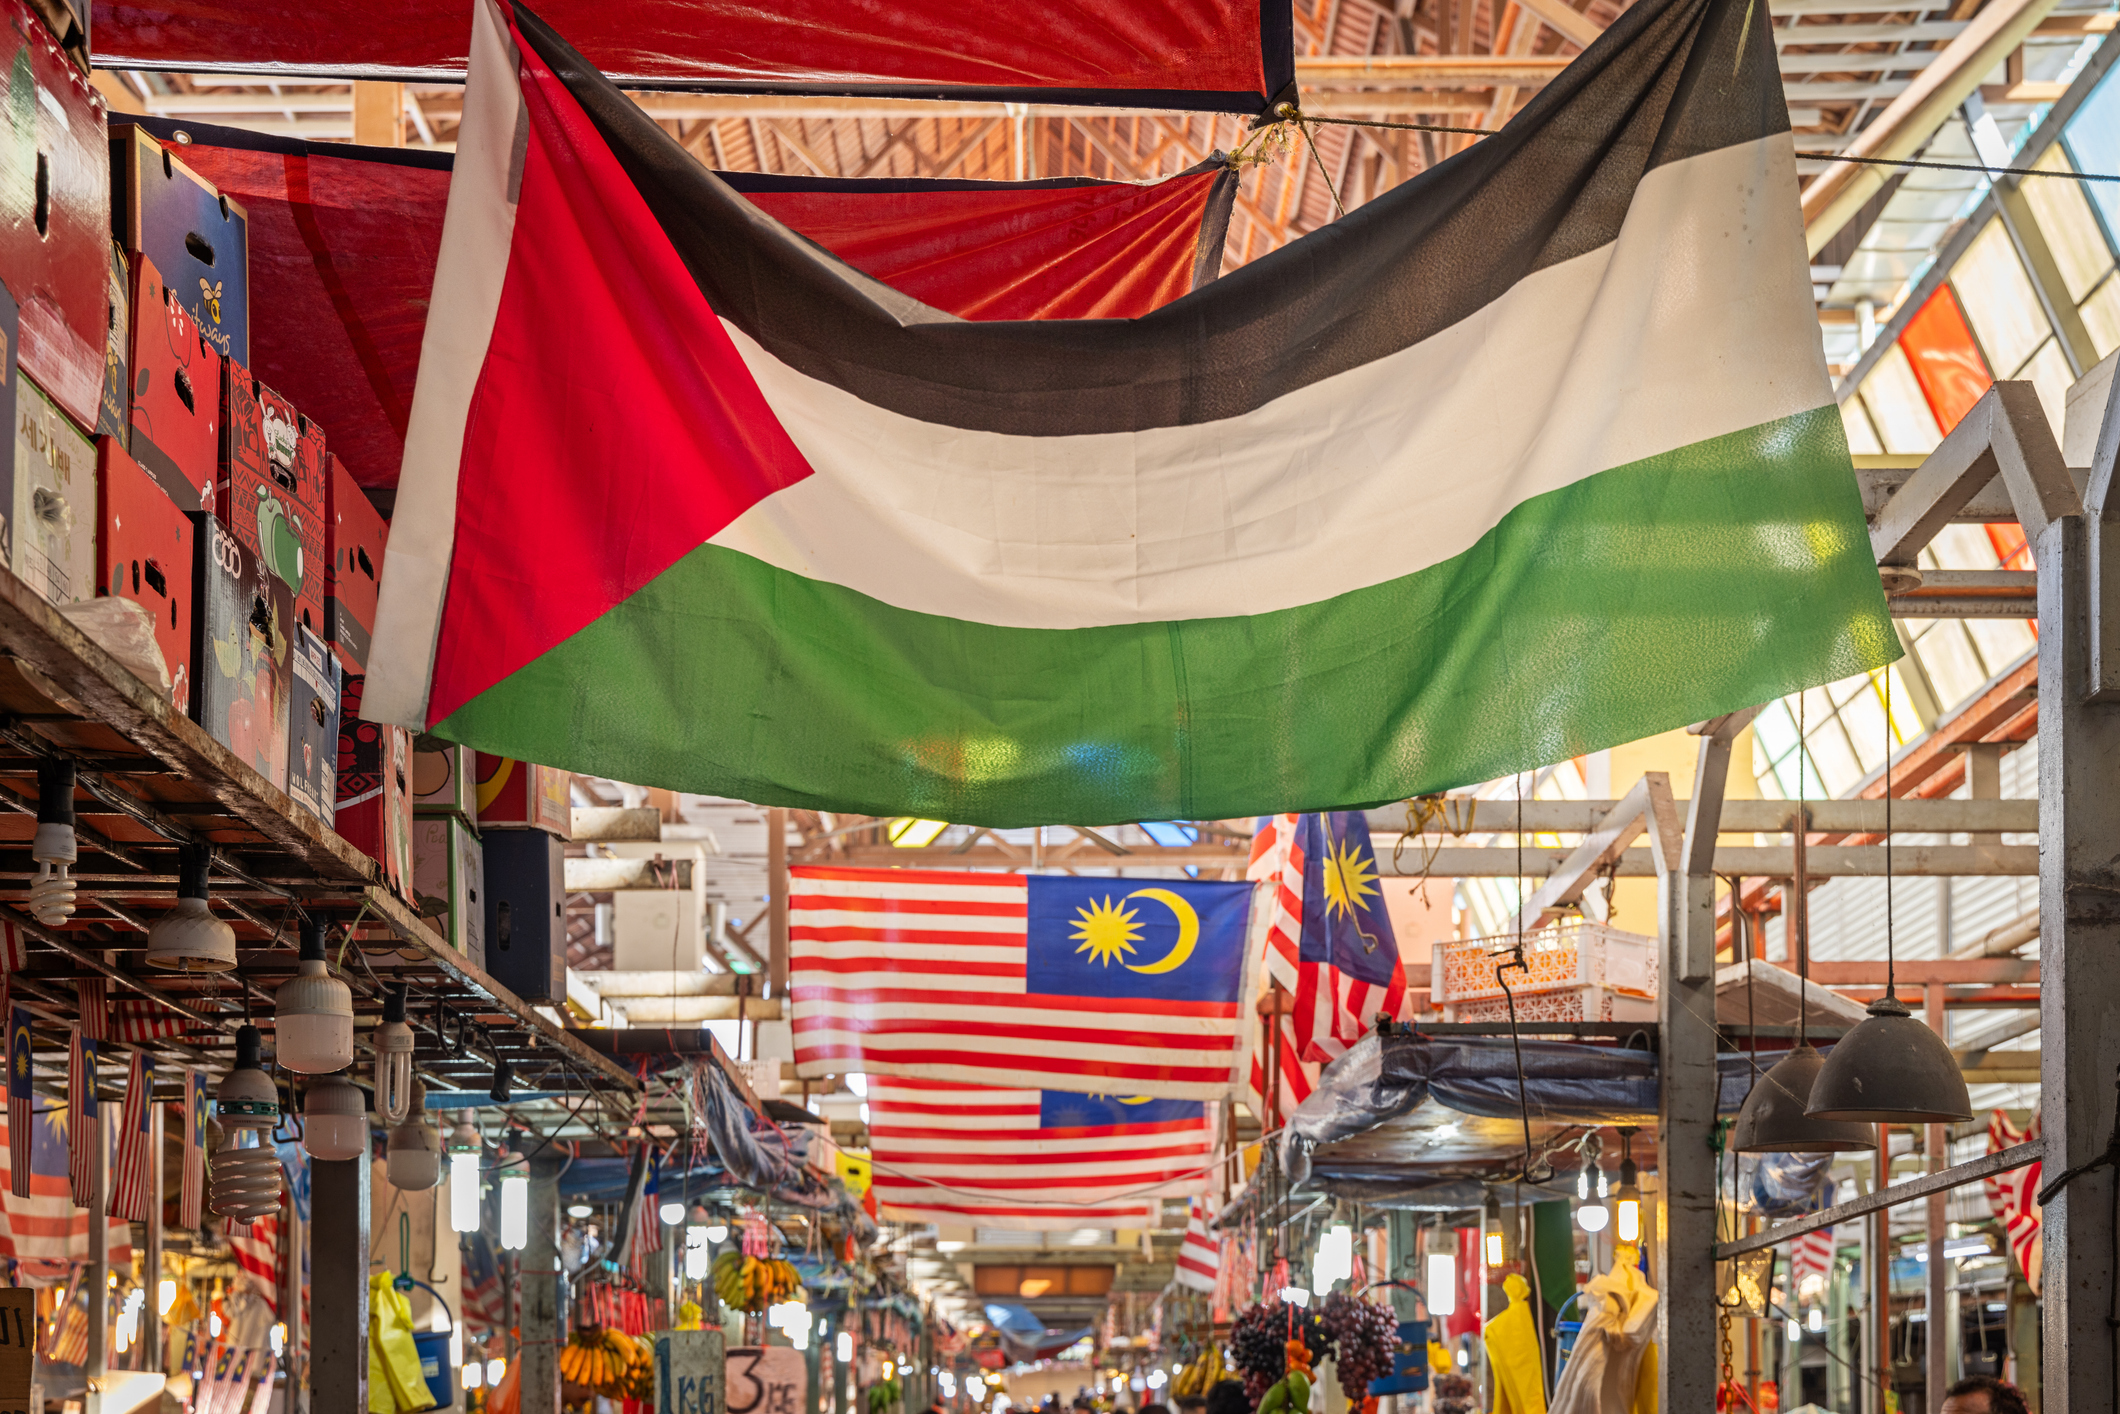 Palestinian flag under the roof in a market hall